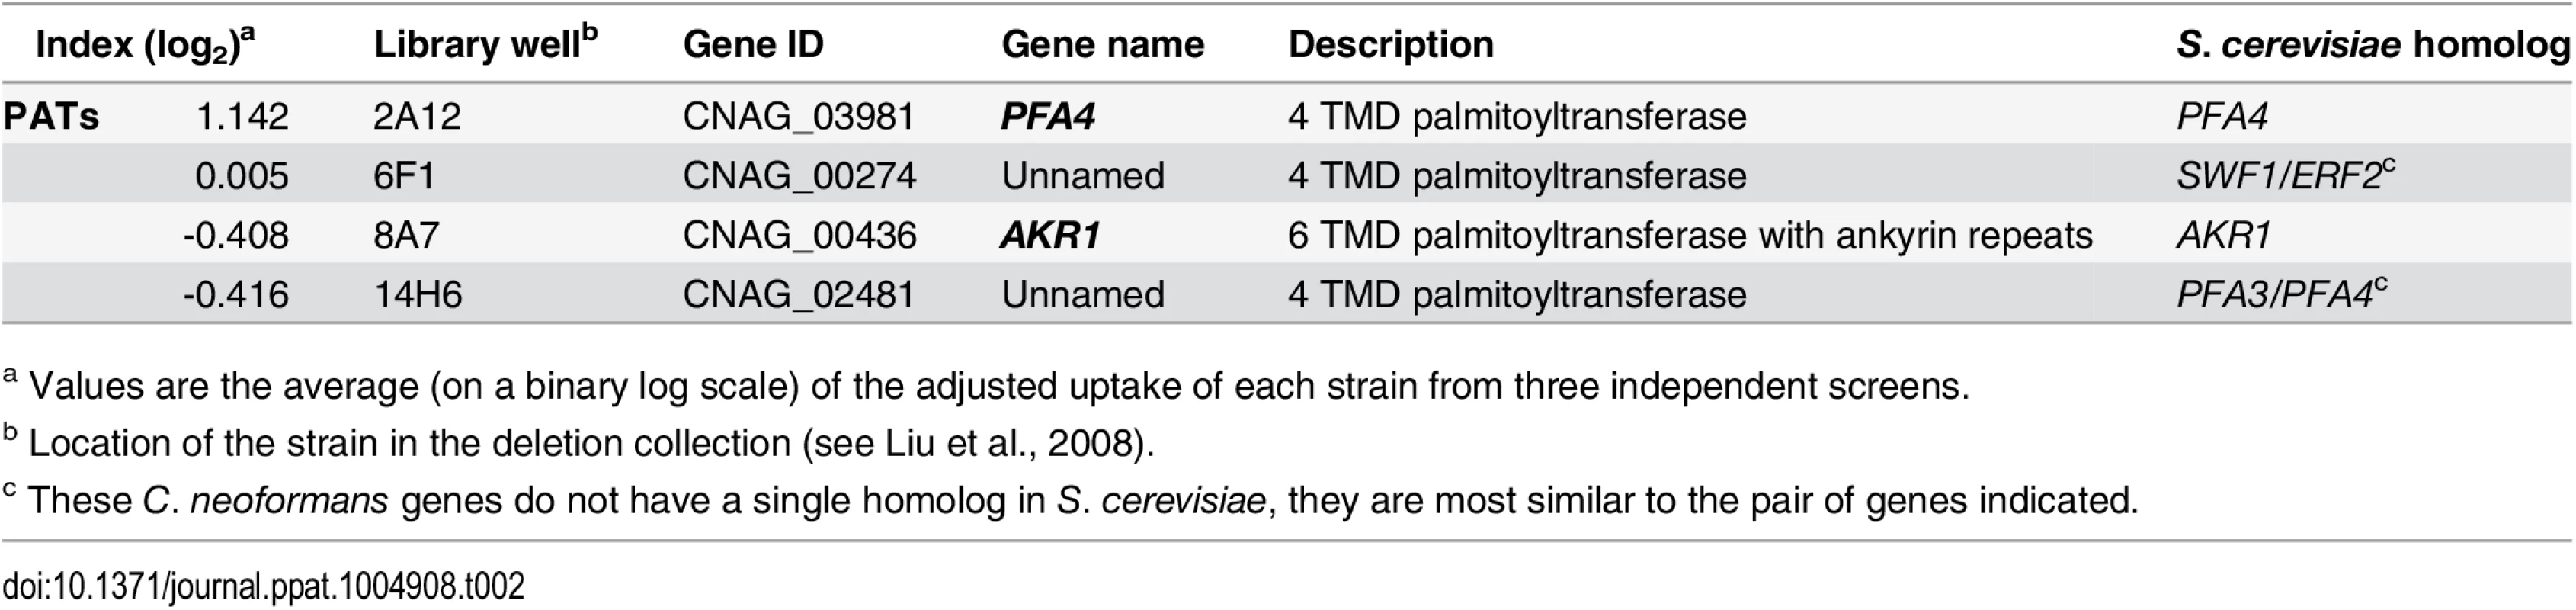 Comparison of putative PATs present on the deletion collection.